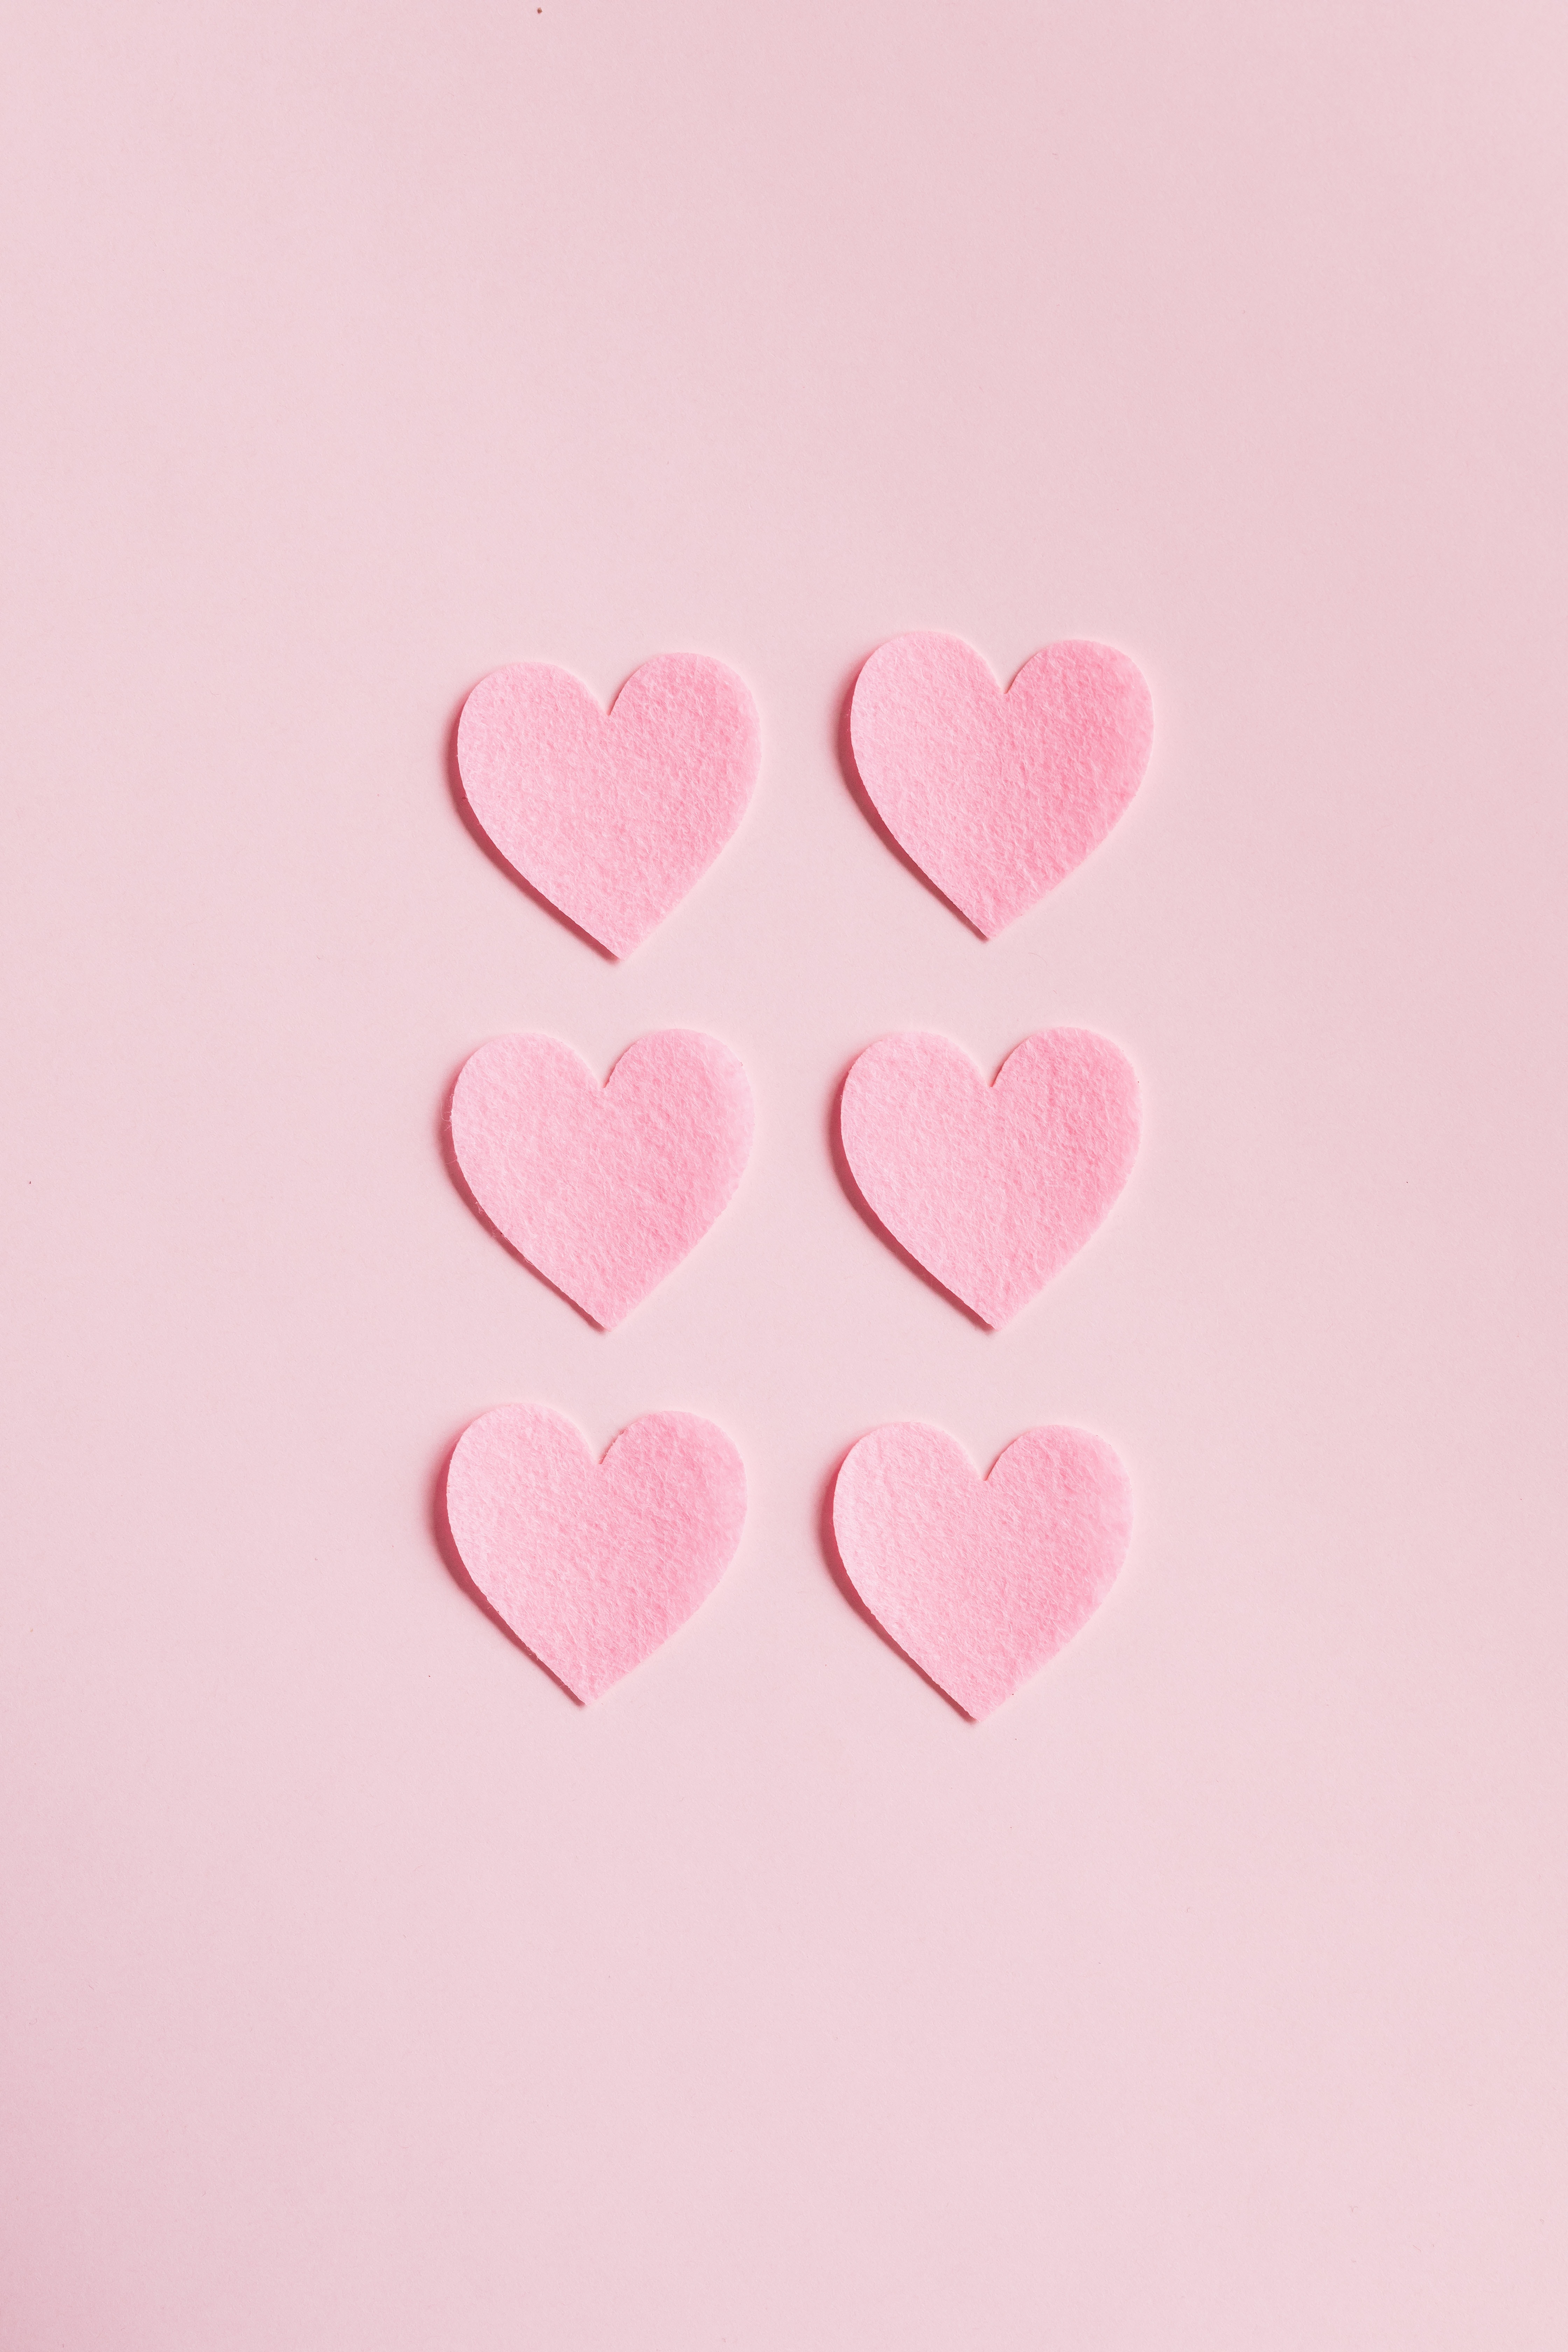 A row of six pink hearts on a pink background - Heart, love, Valentine's Day, pink heart